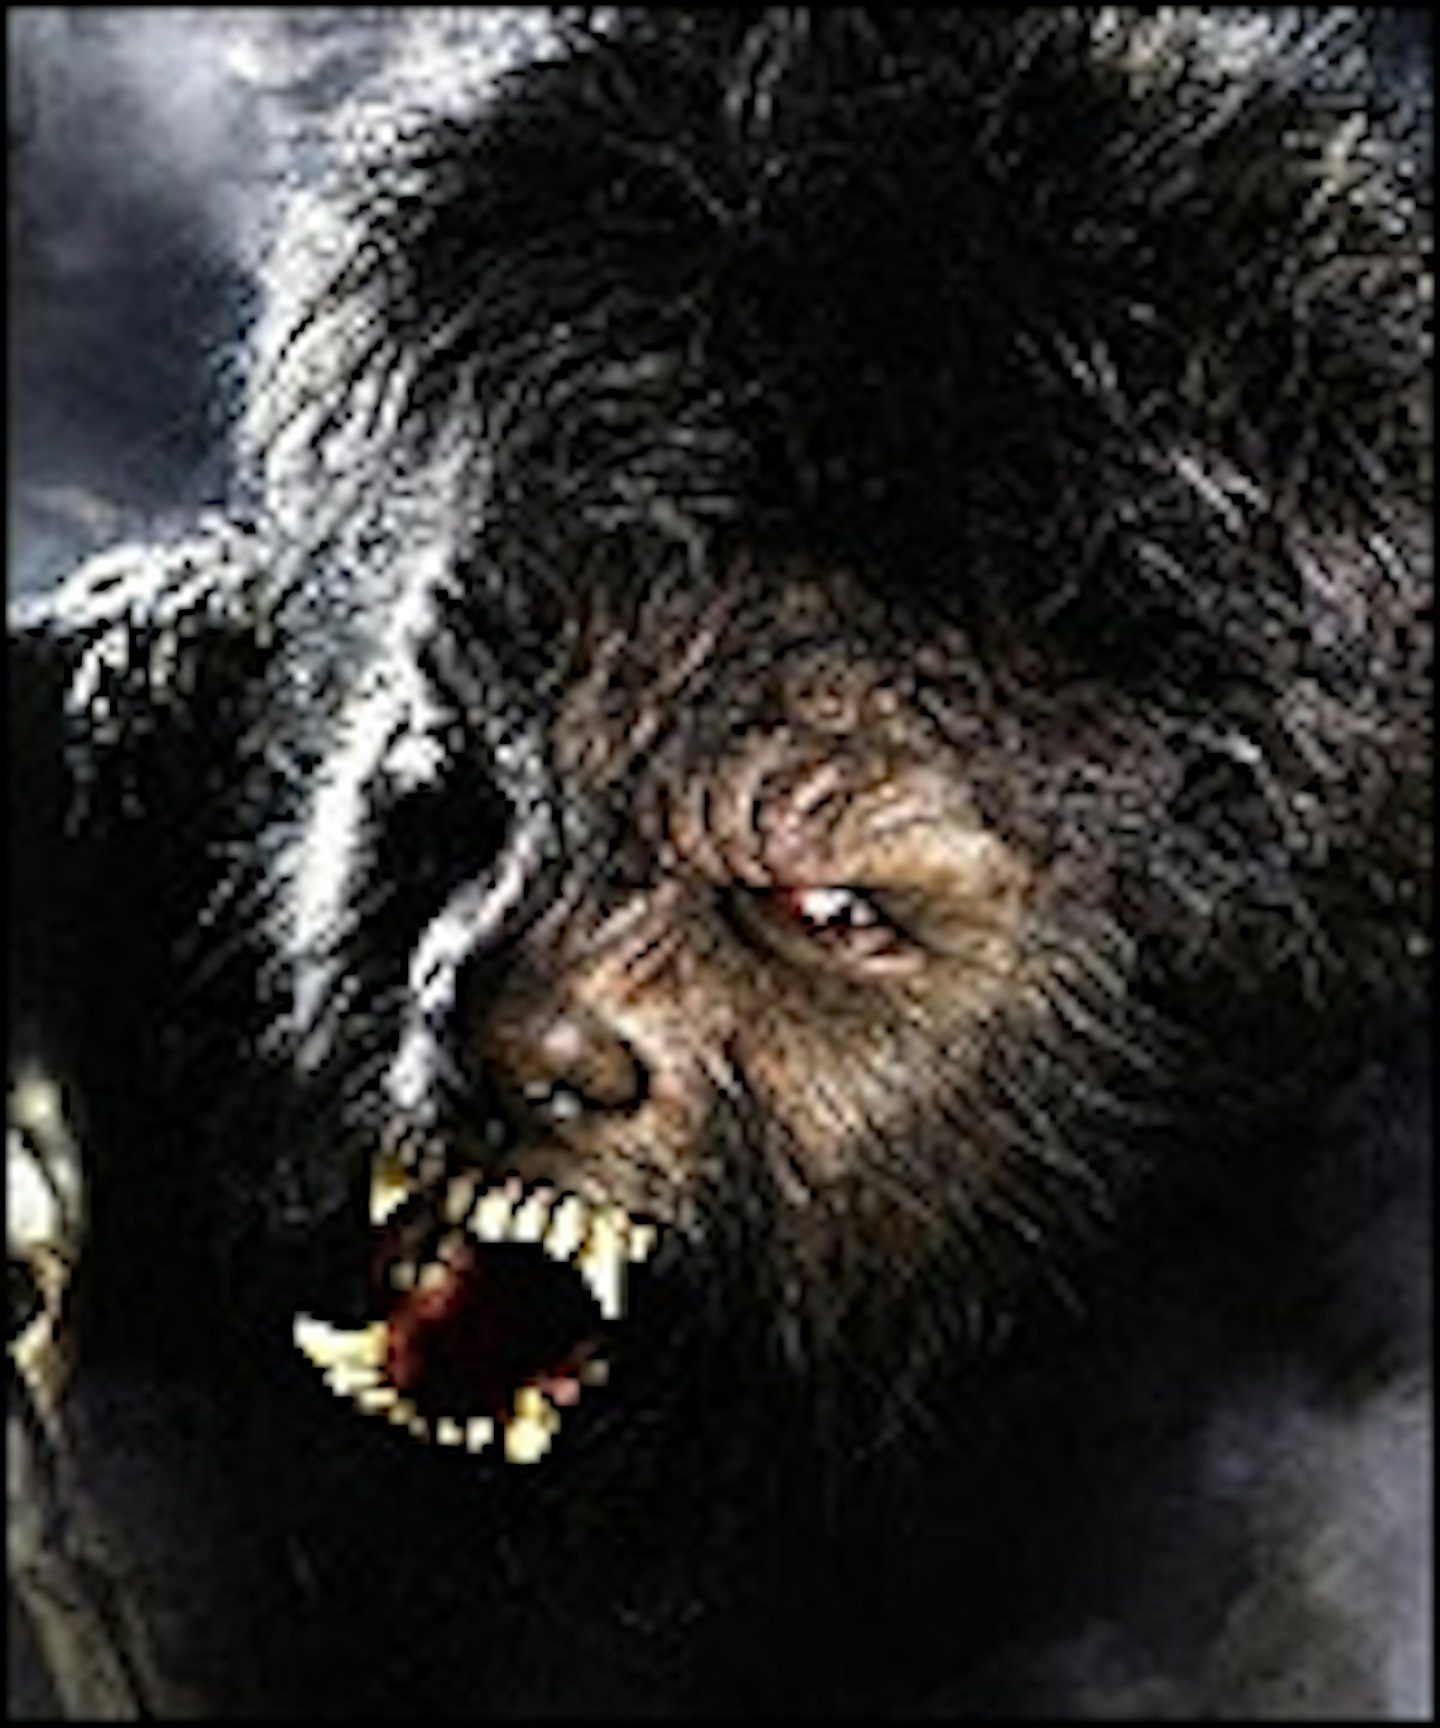 The Wolfman Trailer Has Arrived